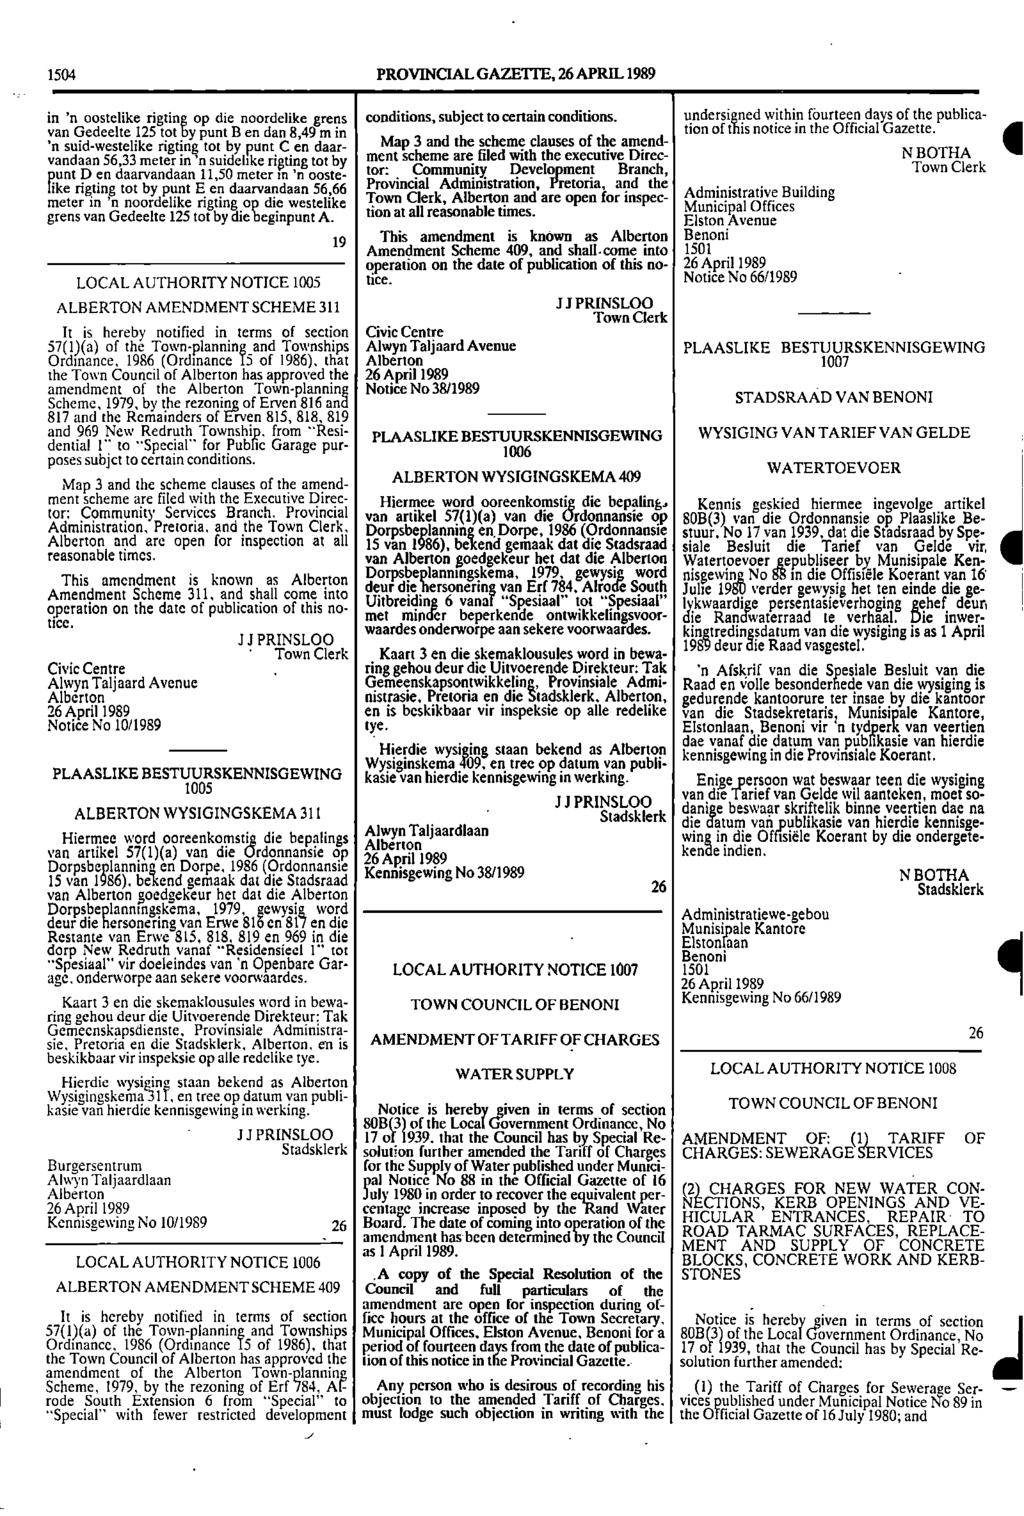 1504 PROVINCIAL GAZETTE, 26 APRIL 1989 Gazettened in 'n oostelike rigting op die noordelike grens conditions, subject to certain conditions within fourteen days of the publica undersigis notice in